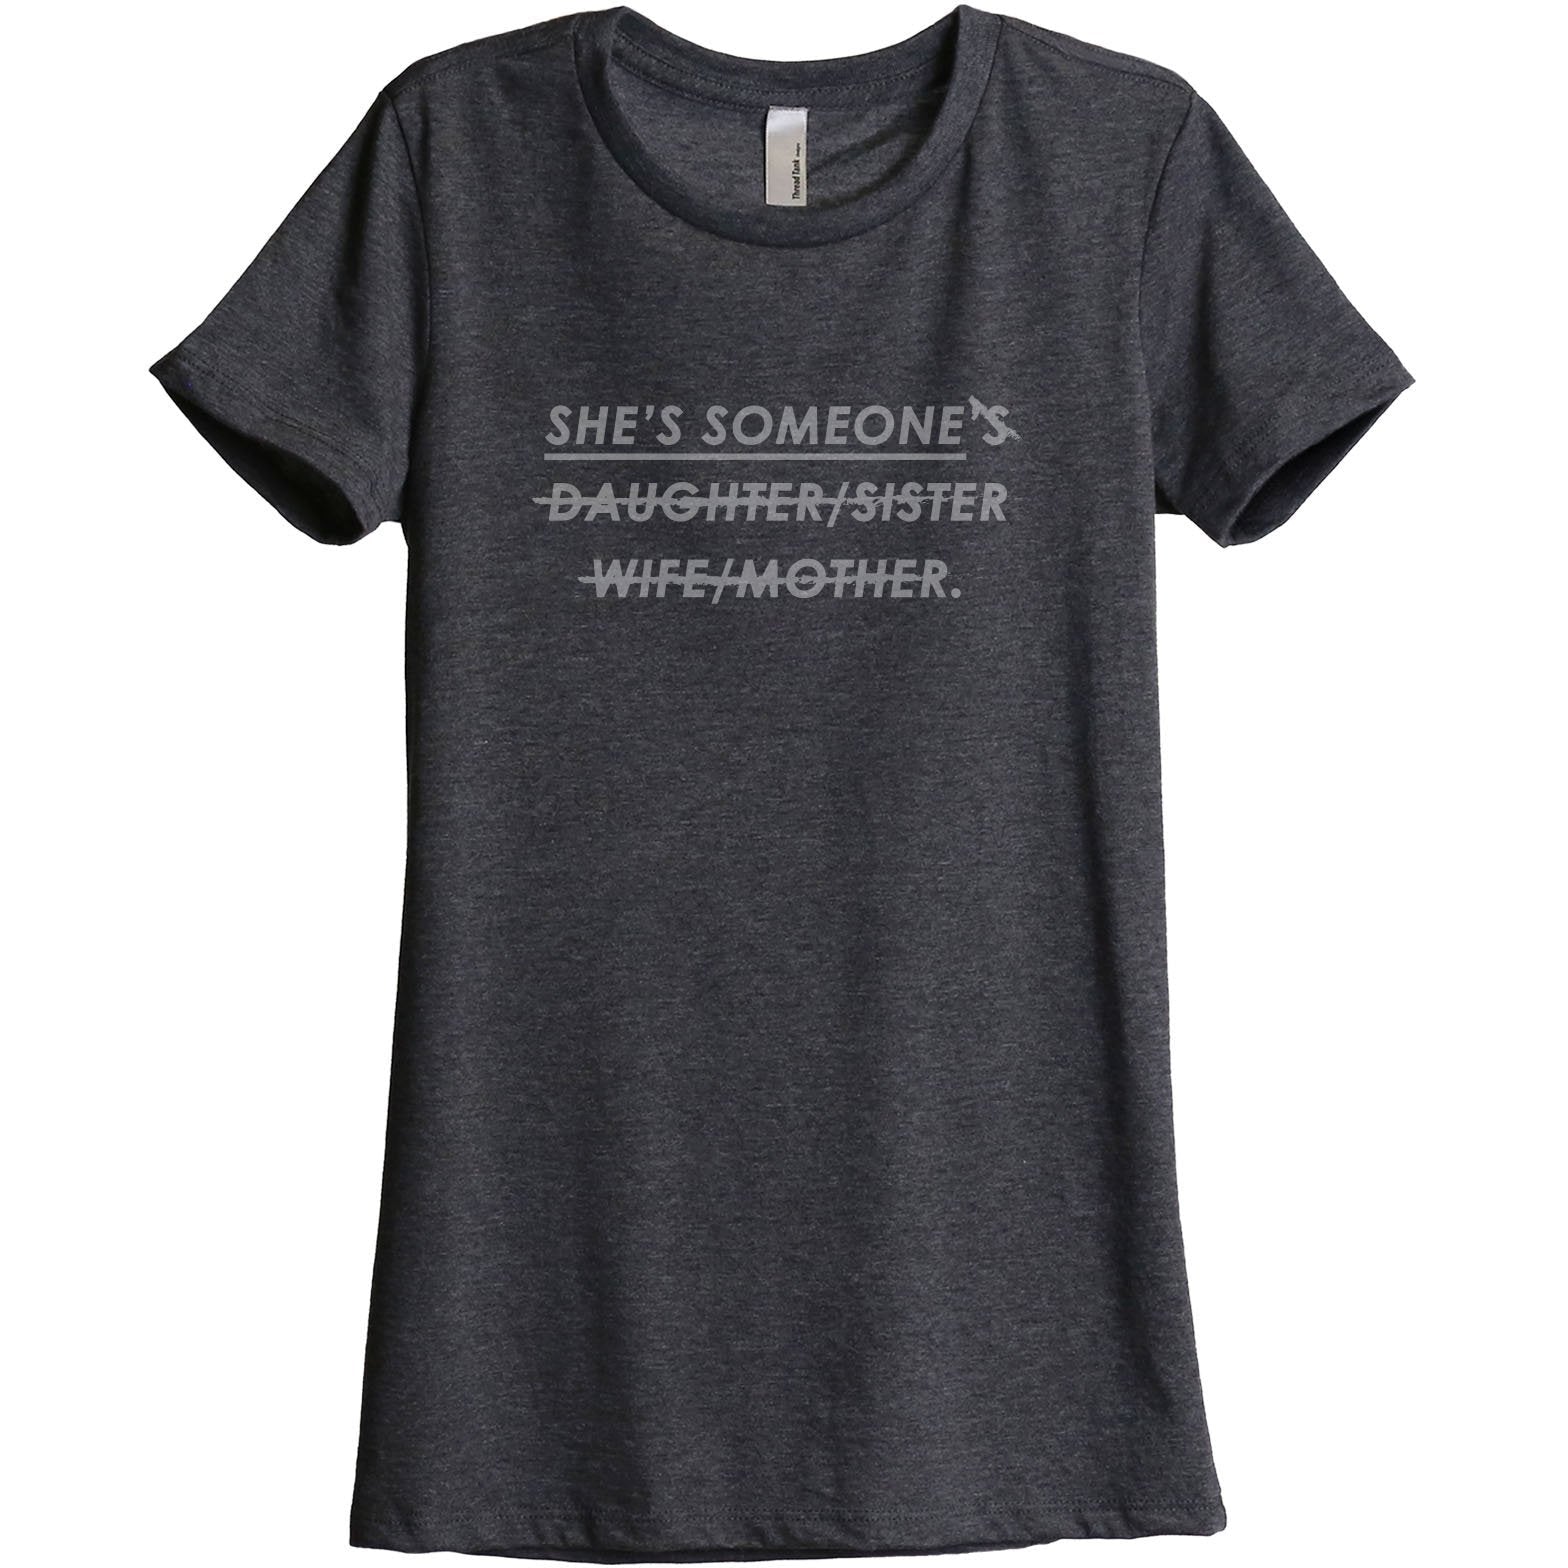 She's Someone's Daughter Sister Wife Mother - Stories You Can Wear